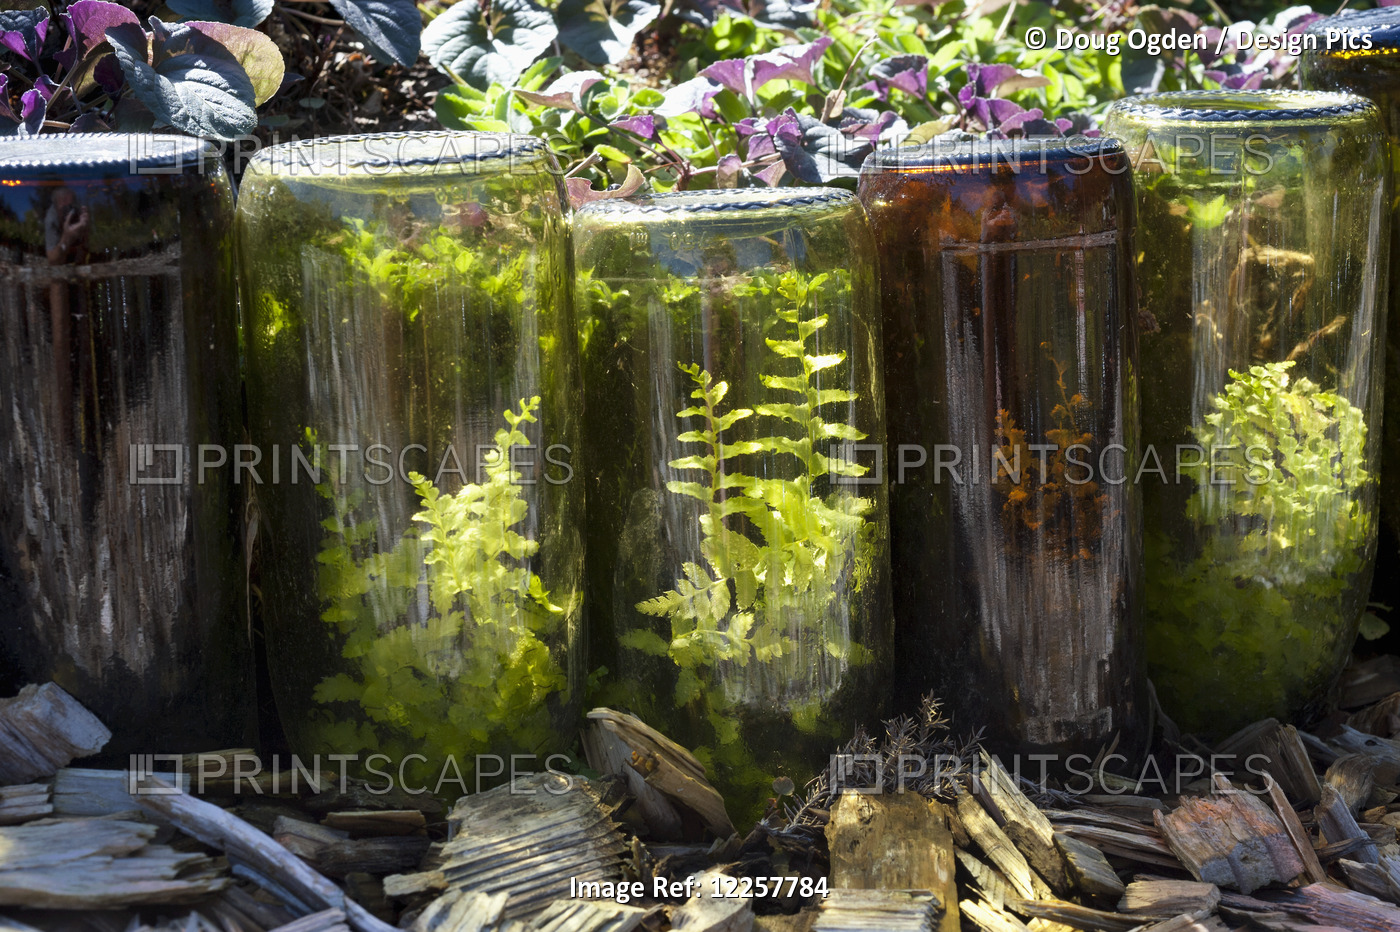 Ferns Growing In Upturned Wine Bottles Used As Edging For A Path Through A ...